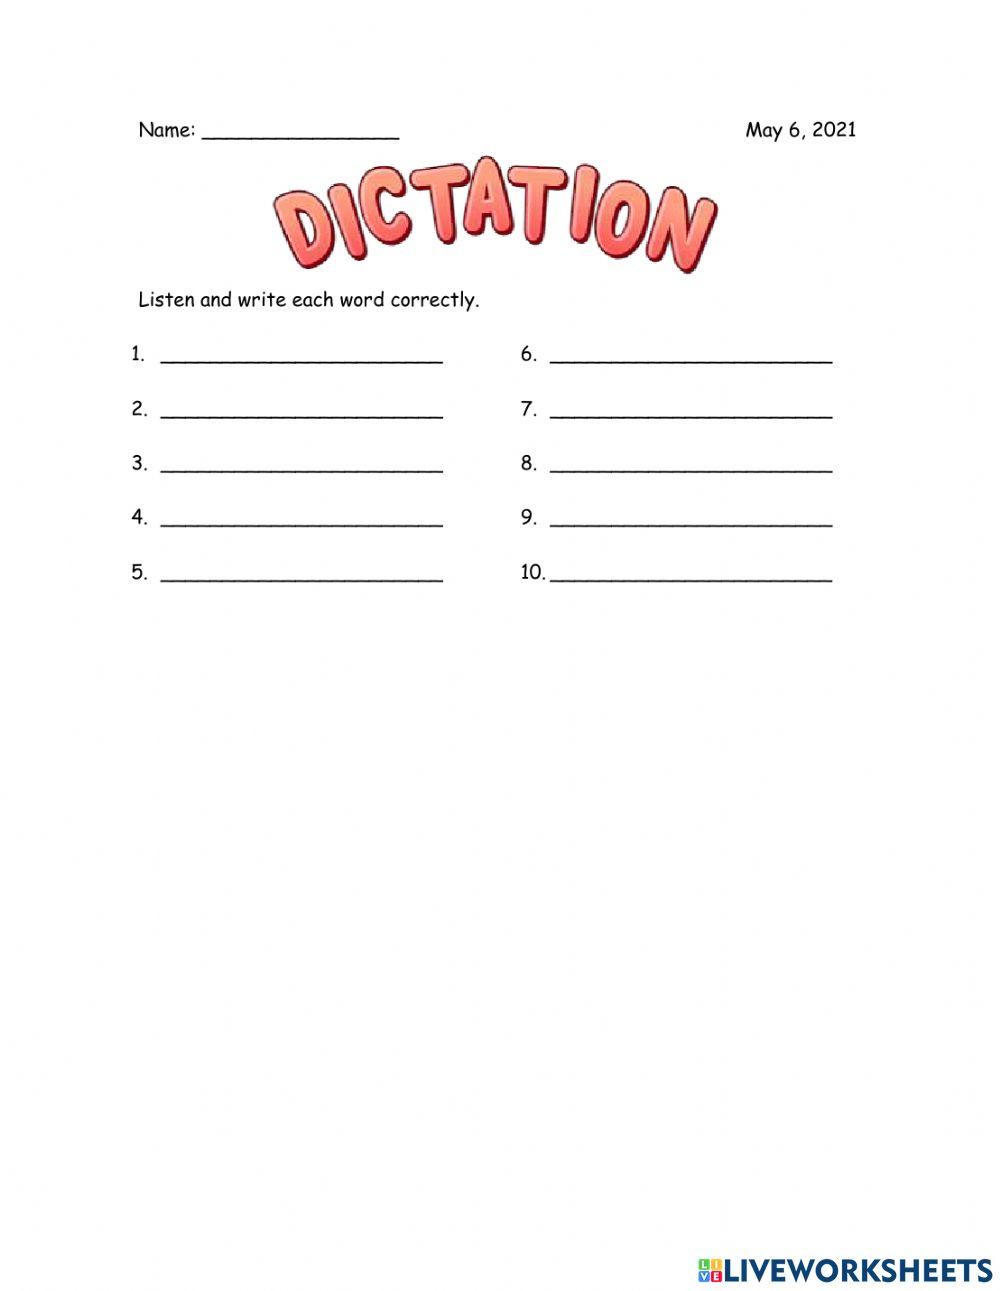 Dictation 3rd 05-06